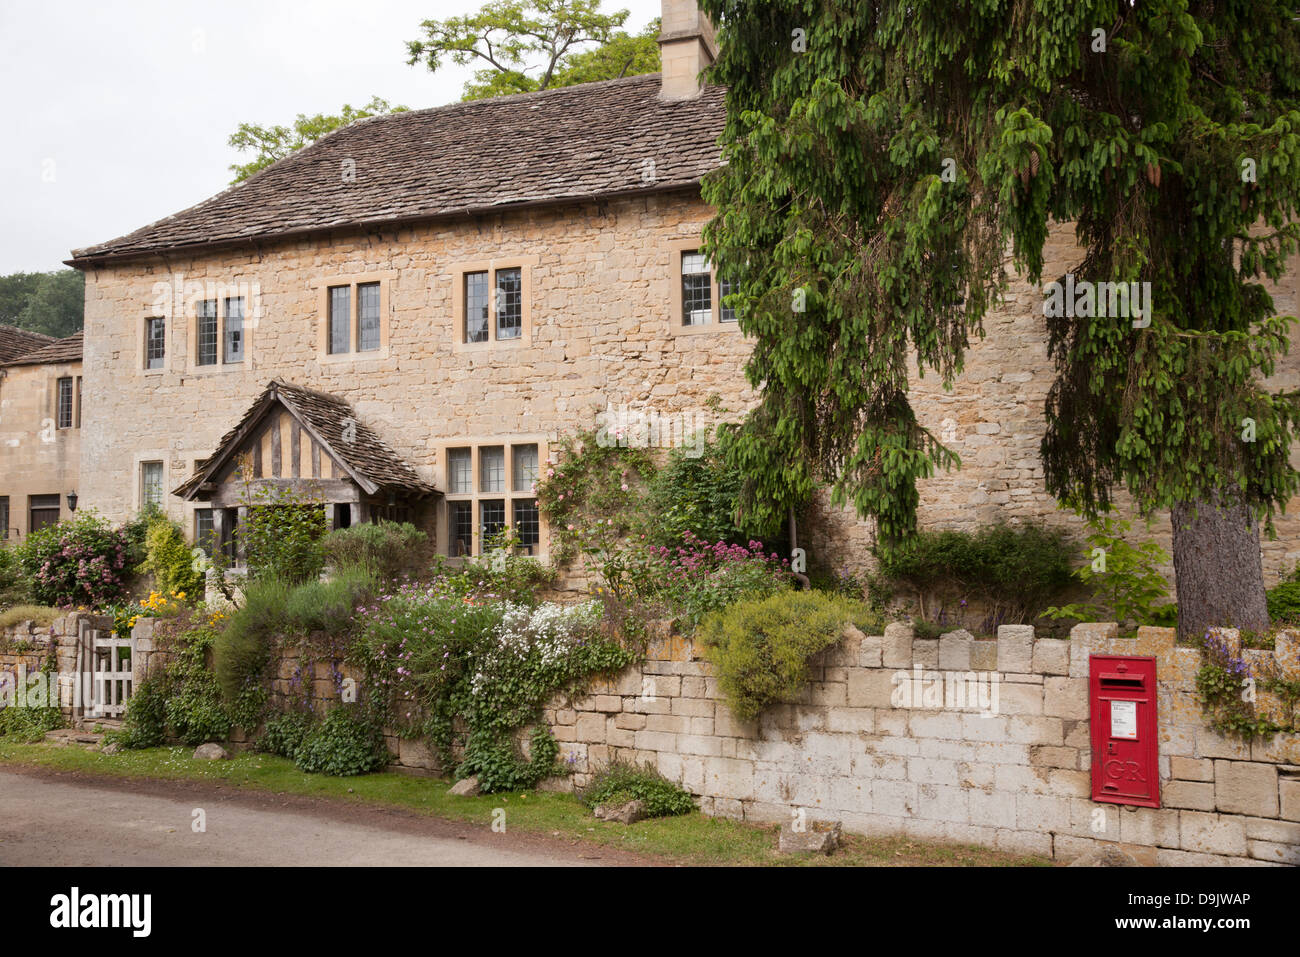 Stone cottages in the village of Iford, Wiltshire, England, UK Stock Photo